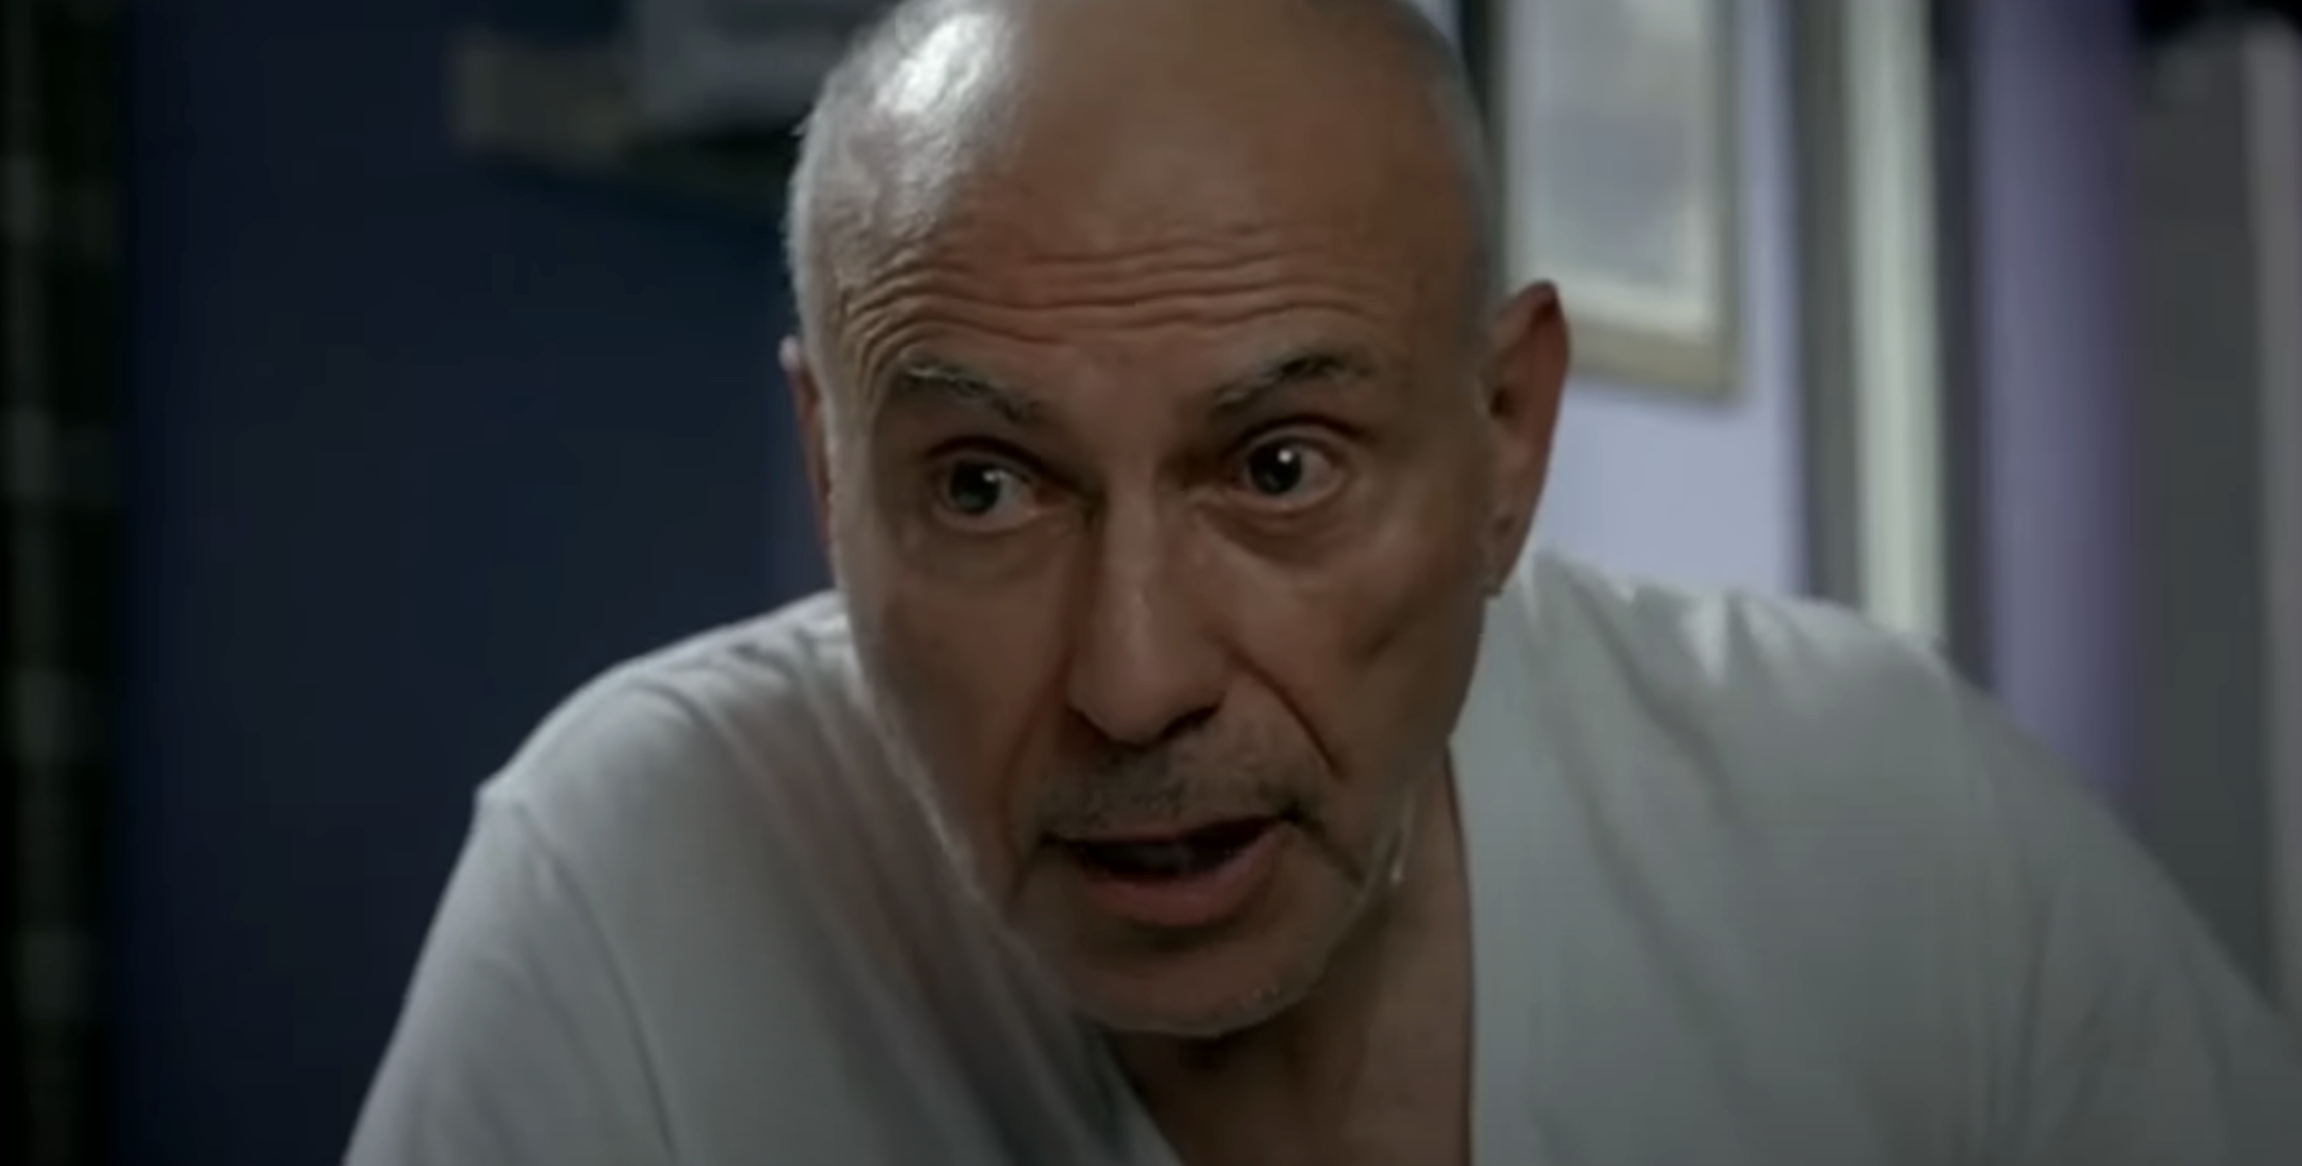 Man with a surprised expression, bald head, wearing a plain T-shirt, indoors